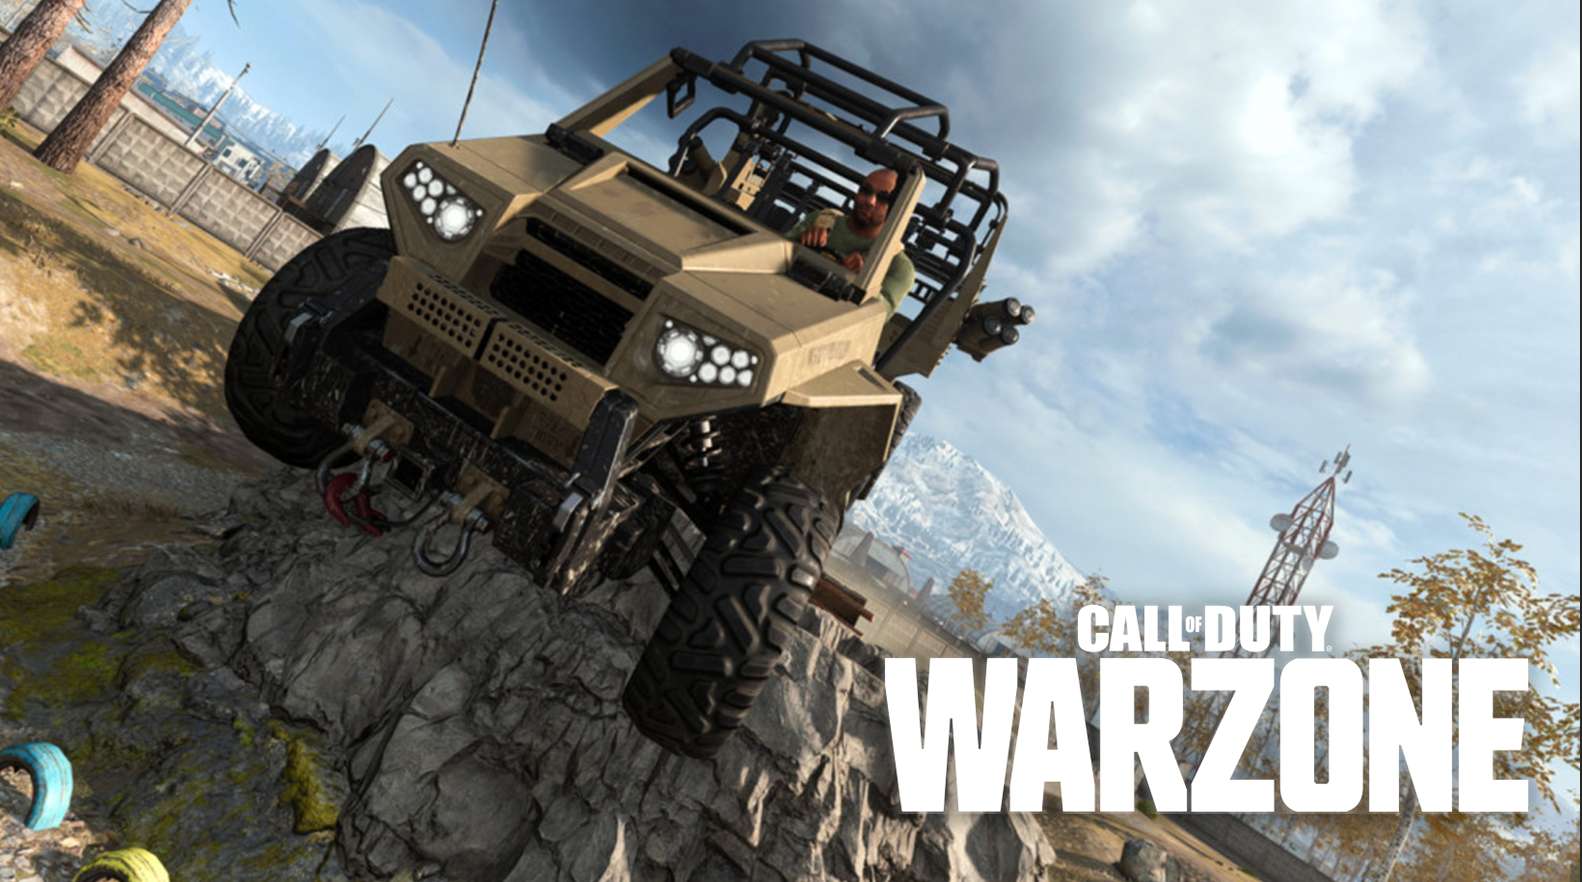 Call of Duty Warzone vehicle gameplay